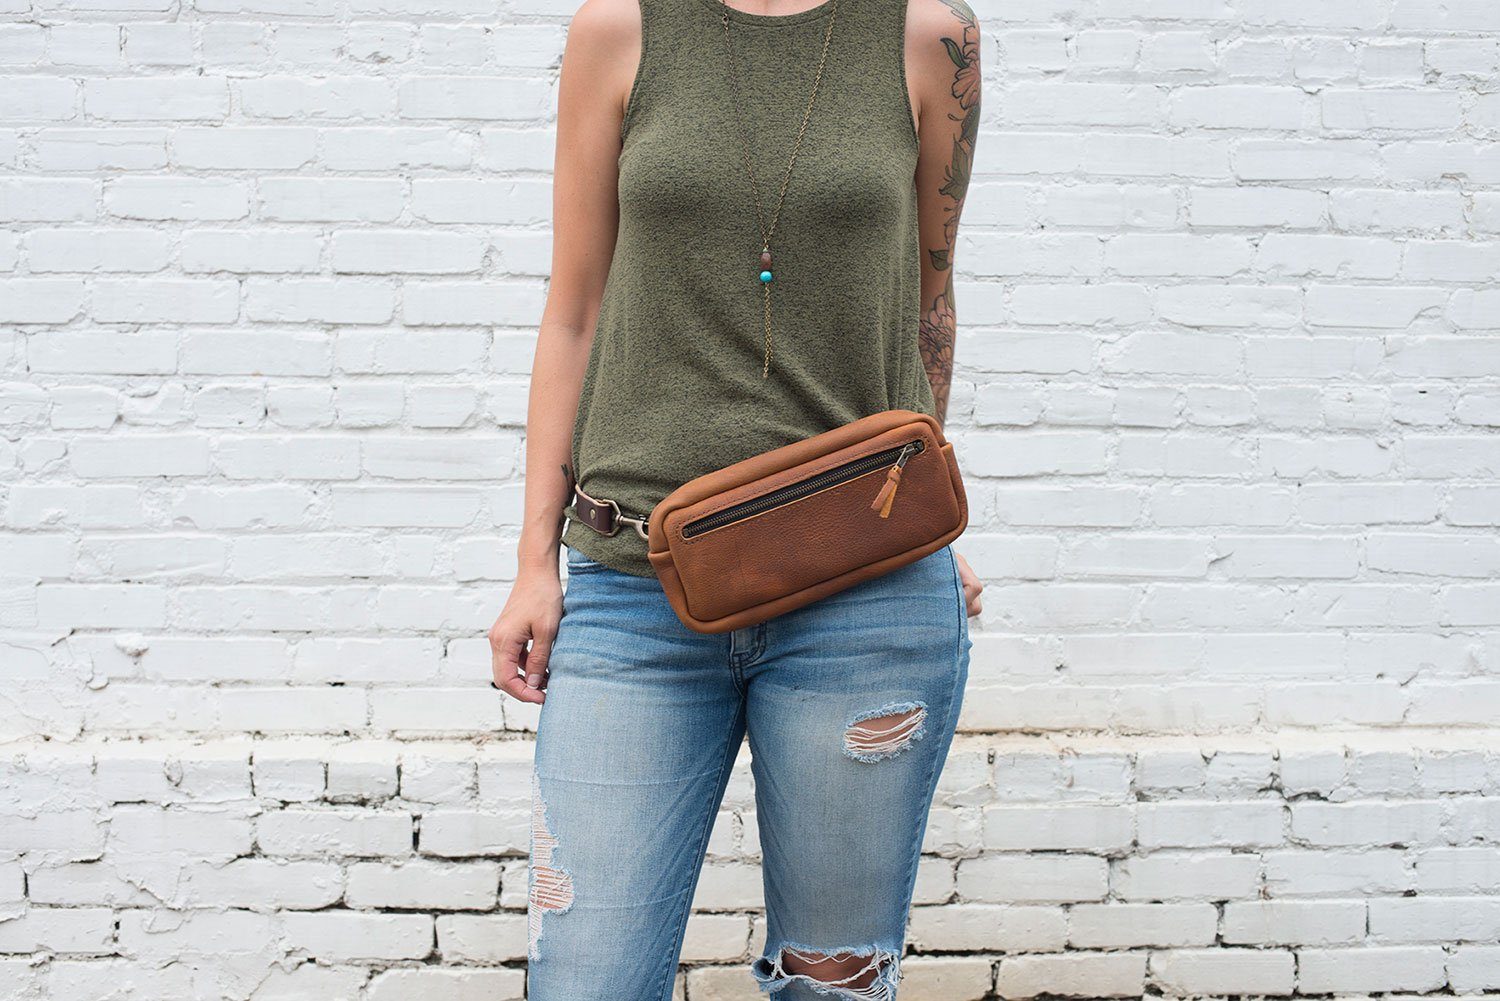 Waist Bag Canvas and Leather Hip Bag Small Fannypack Belt Bag 